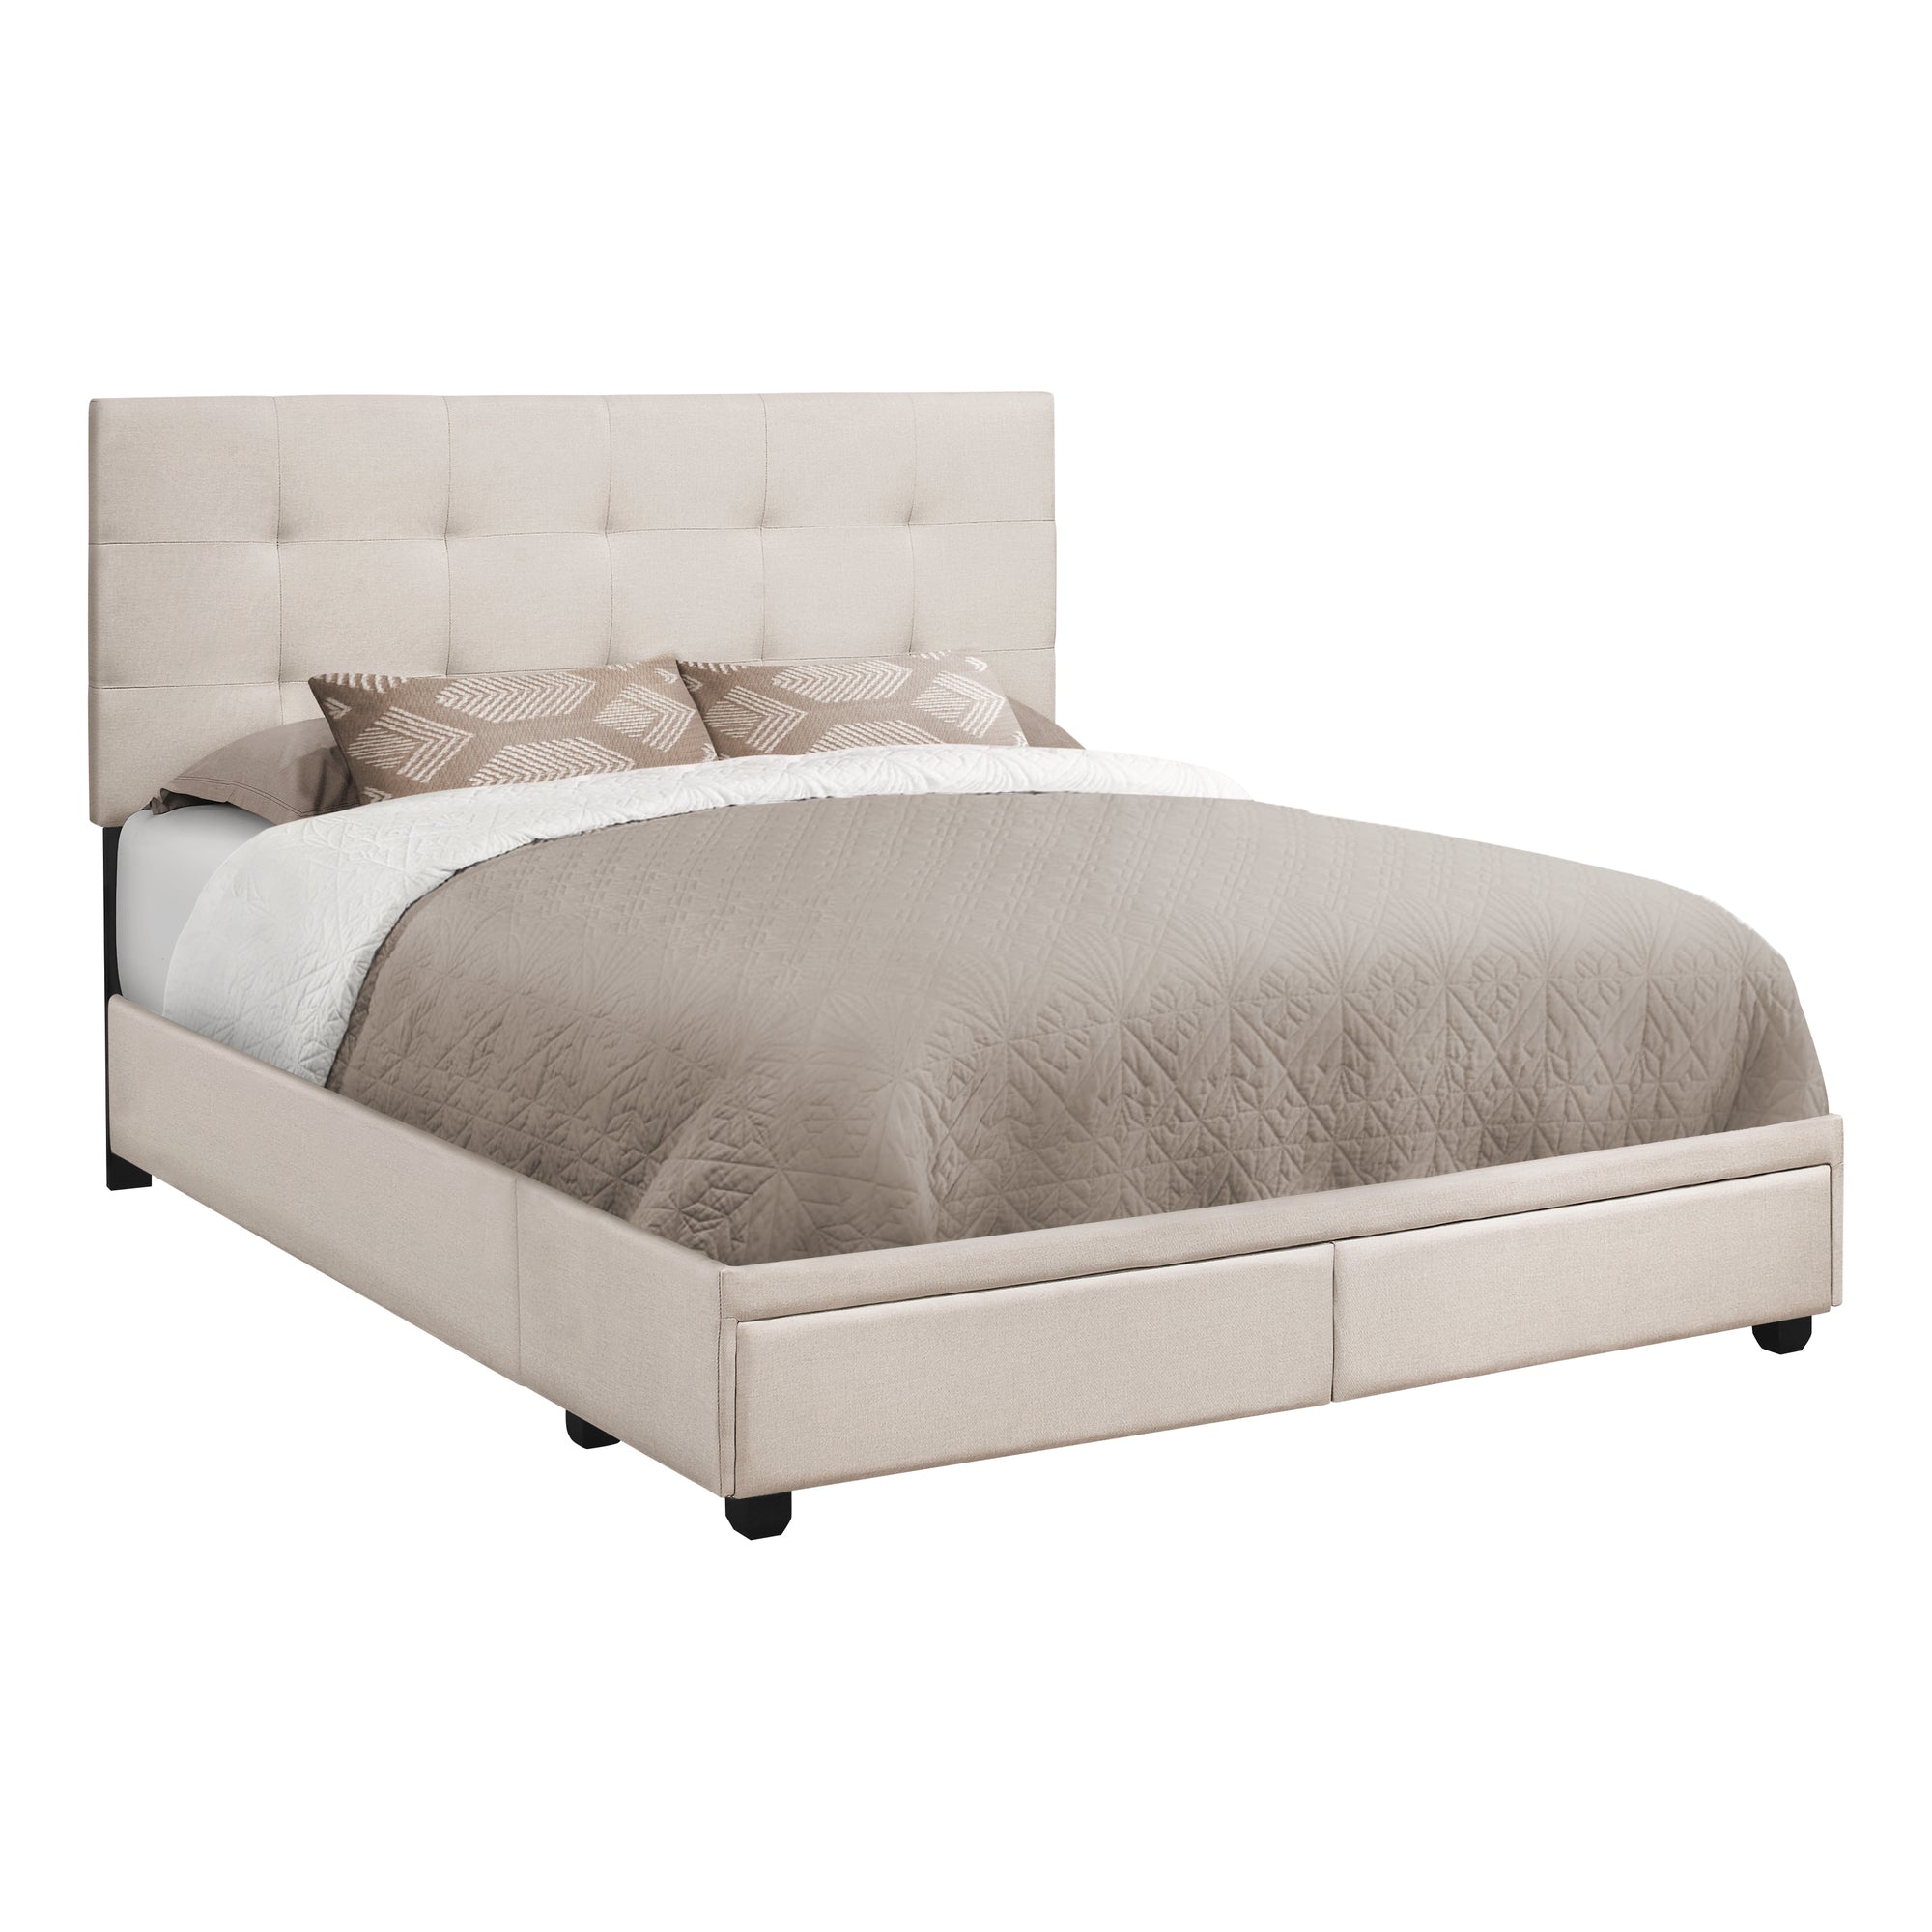 Bed - Queen Size / Beige Linen With 2 Storage Drawers